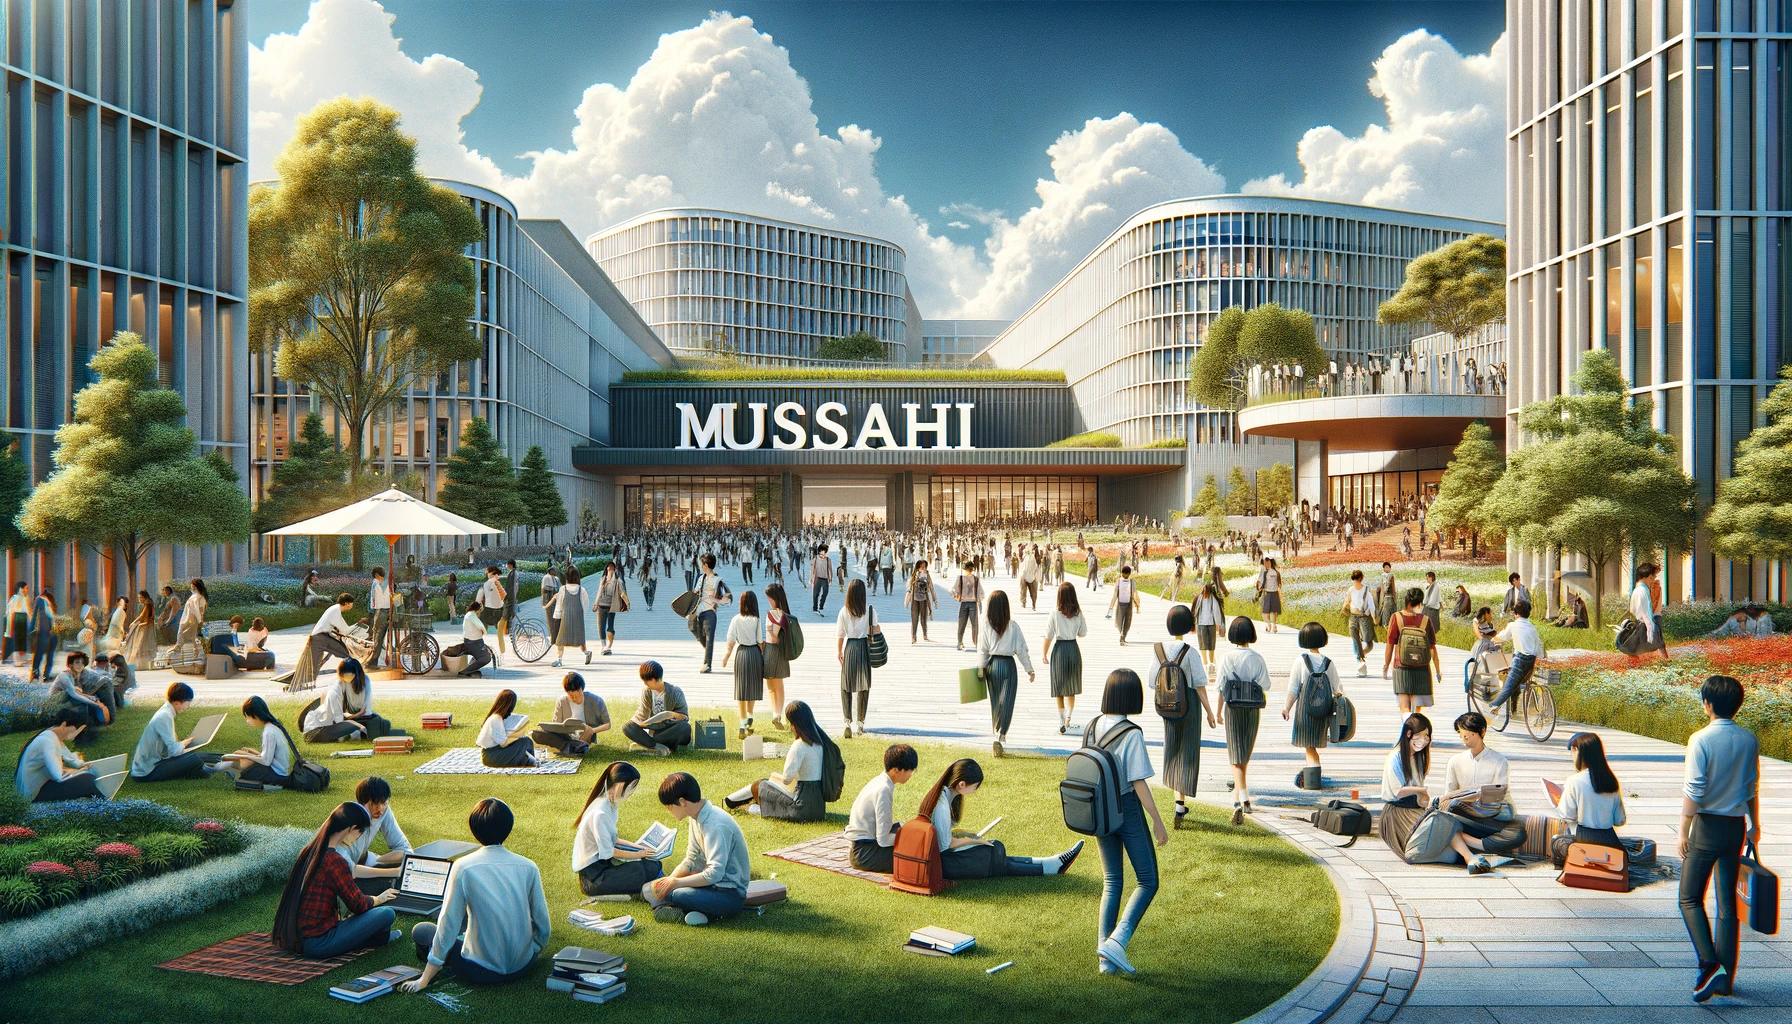 A bustling campus scene at Musashi University in Japan, illustrating its popularity with the word 'Musashi' prominently displayed in English. The image features a diverse group of students of various Asian descents, interacting in a vibrant, modern university setting. Students are seen walking, studying, and engaging in discussions across a beautifully landscaped campus with contemporary architecture and green spaces. Some students are relaxing on the grass, others are using laptops and books under the shade of trees. The environment is lively and intellectually stimulating, showcasing a thriving academic community with 'Musashi' visibly included in the scene.